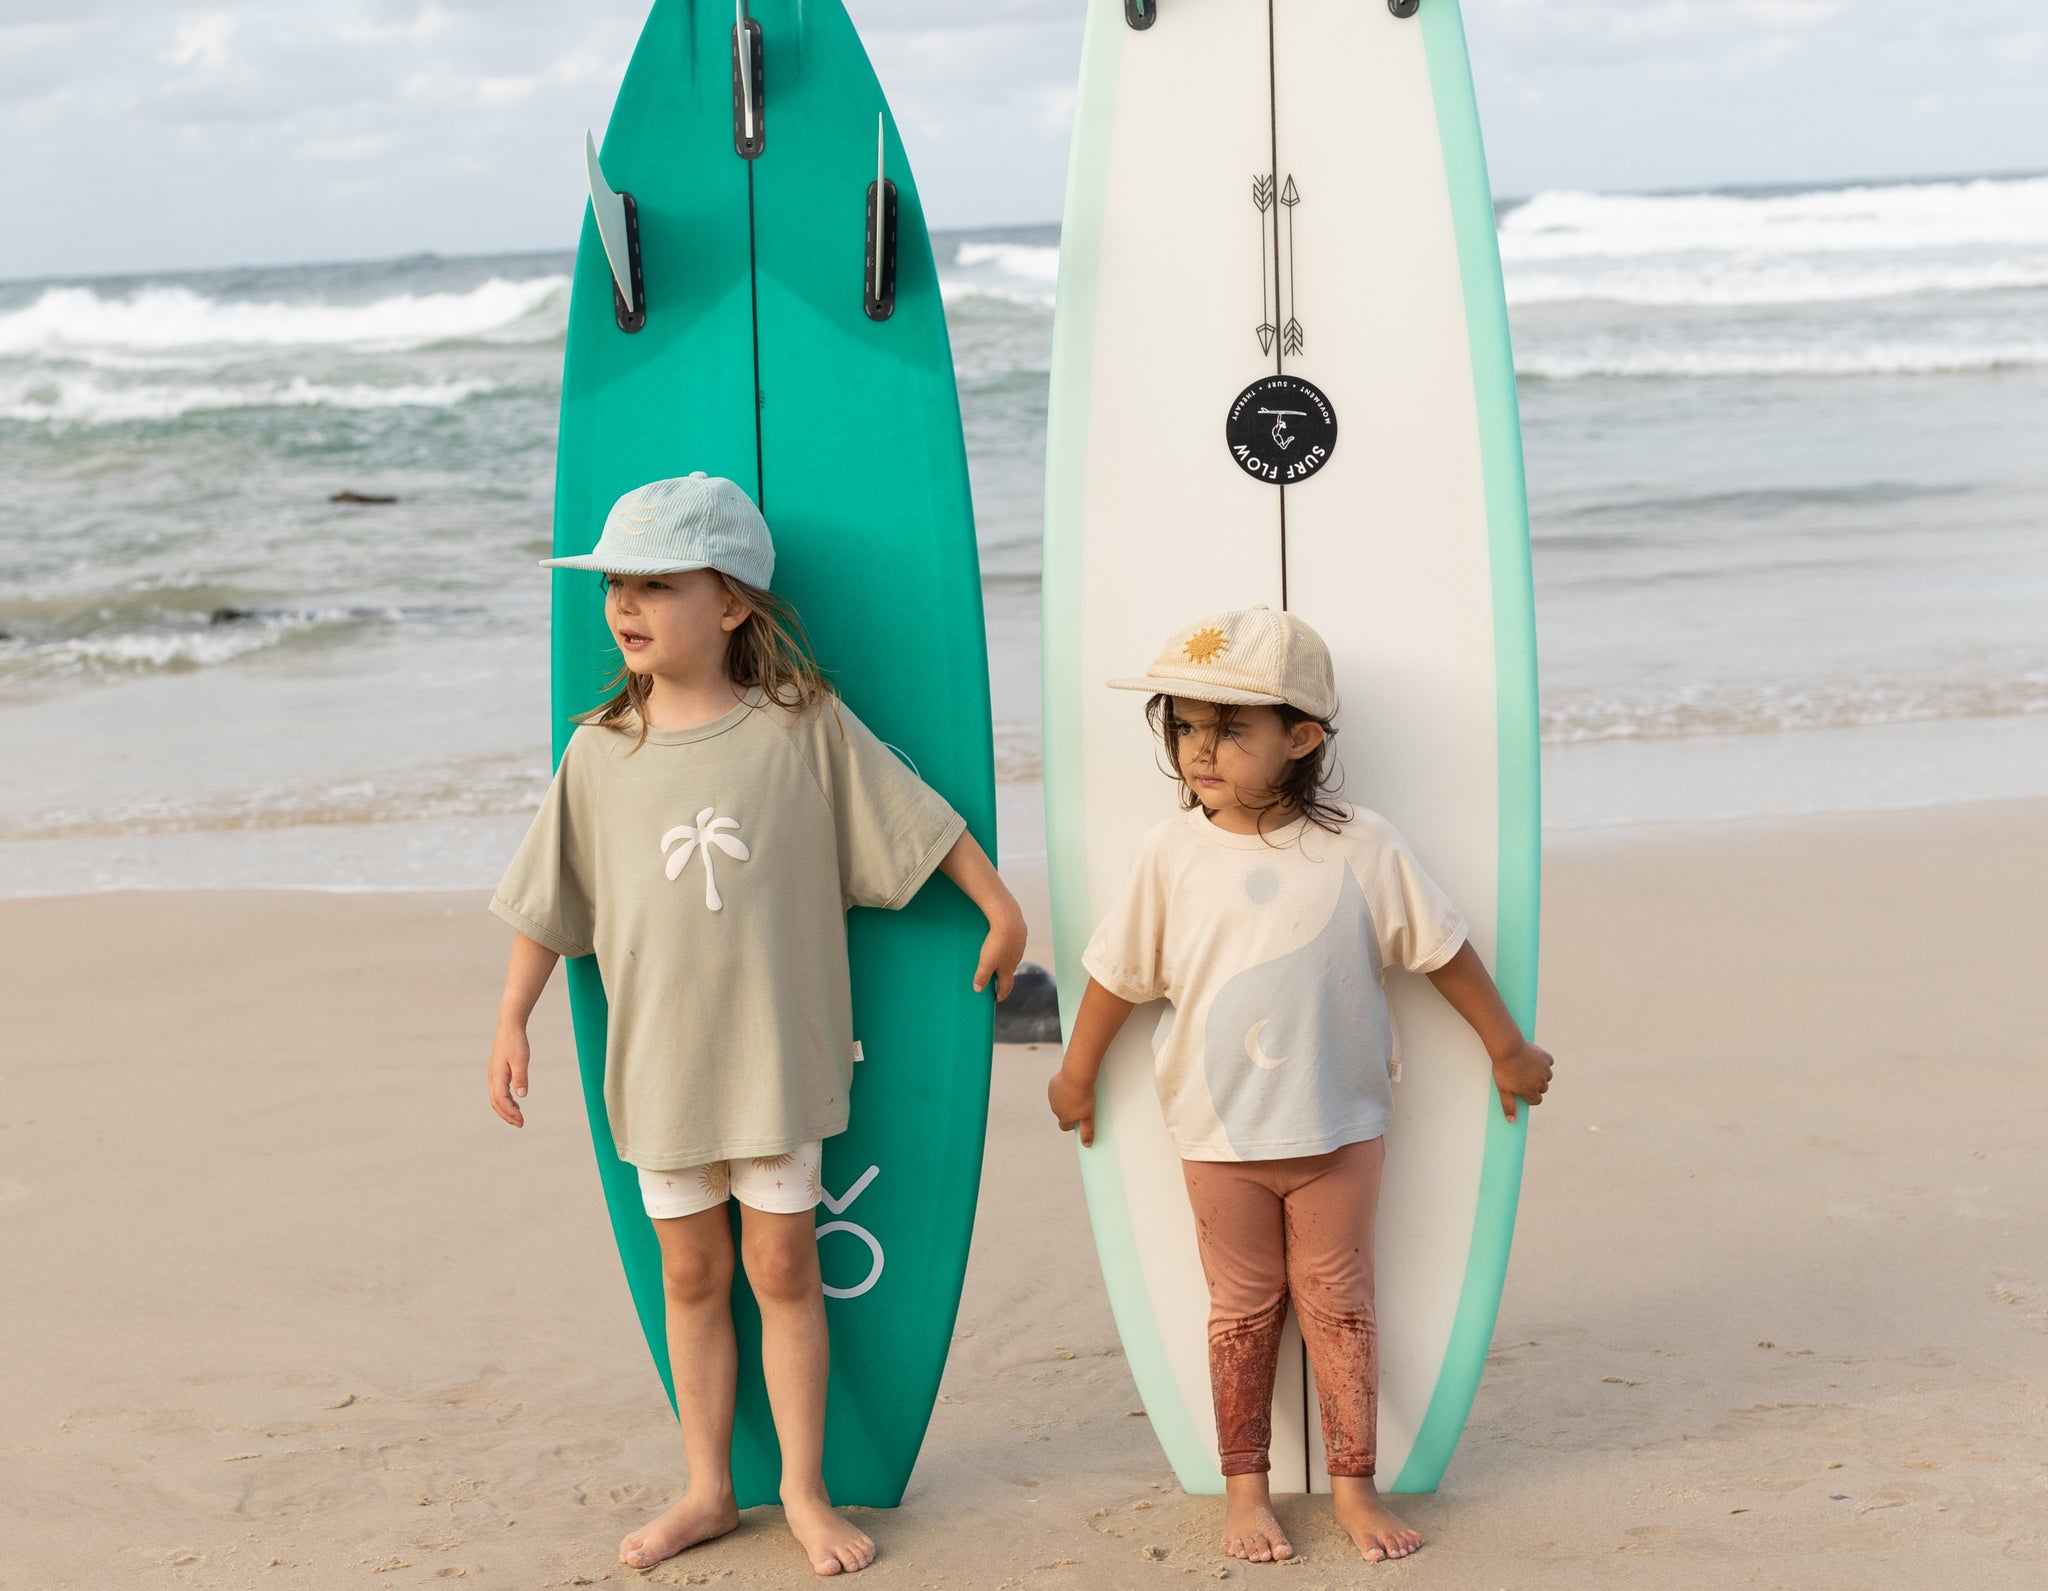 Kids wearing bamboo clothes by Bam Loves boo with surfboards